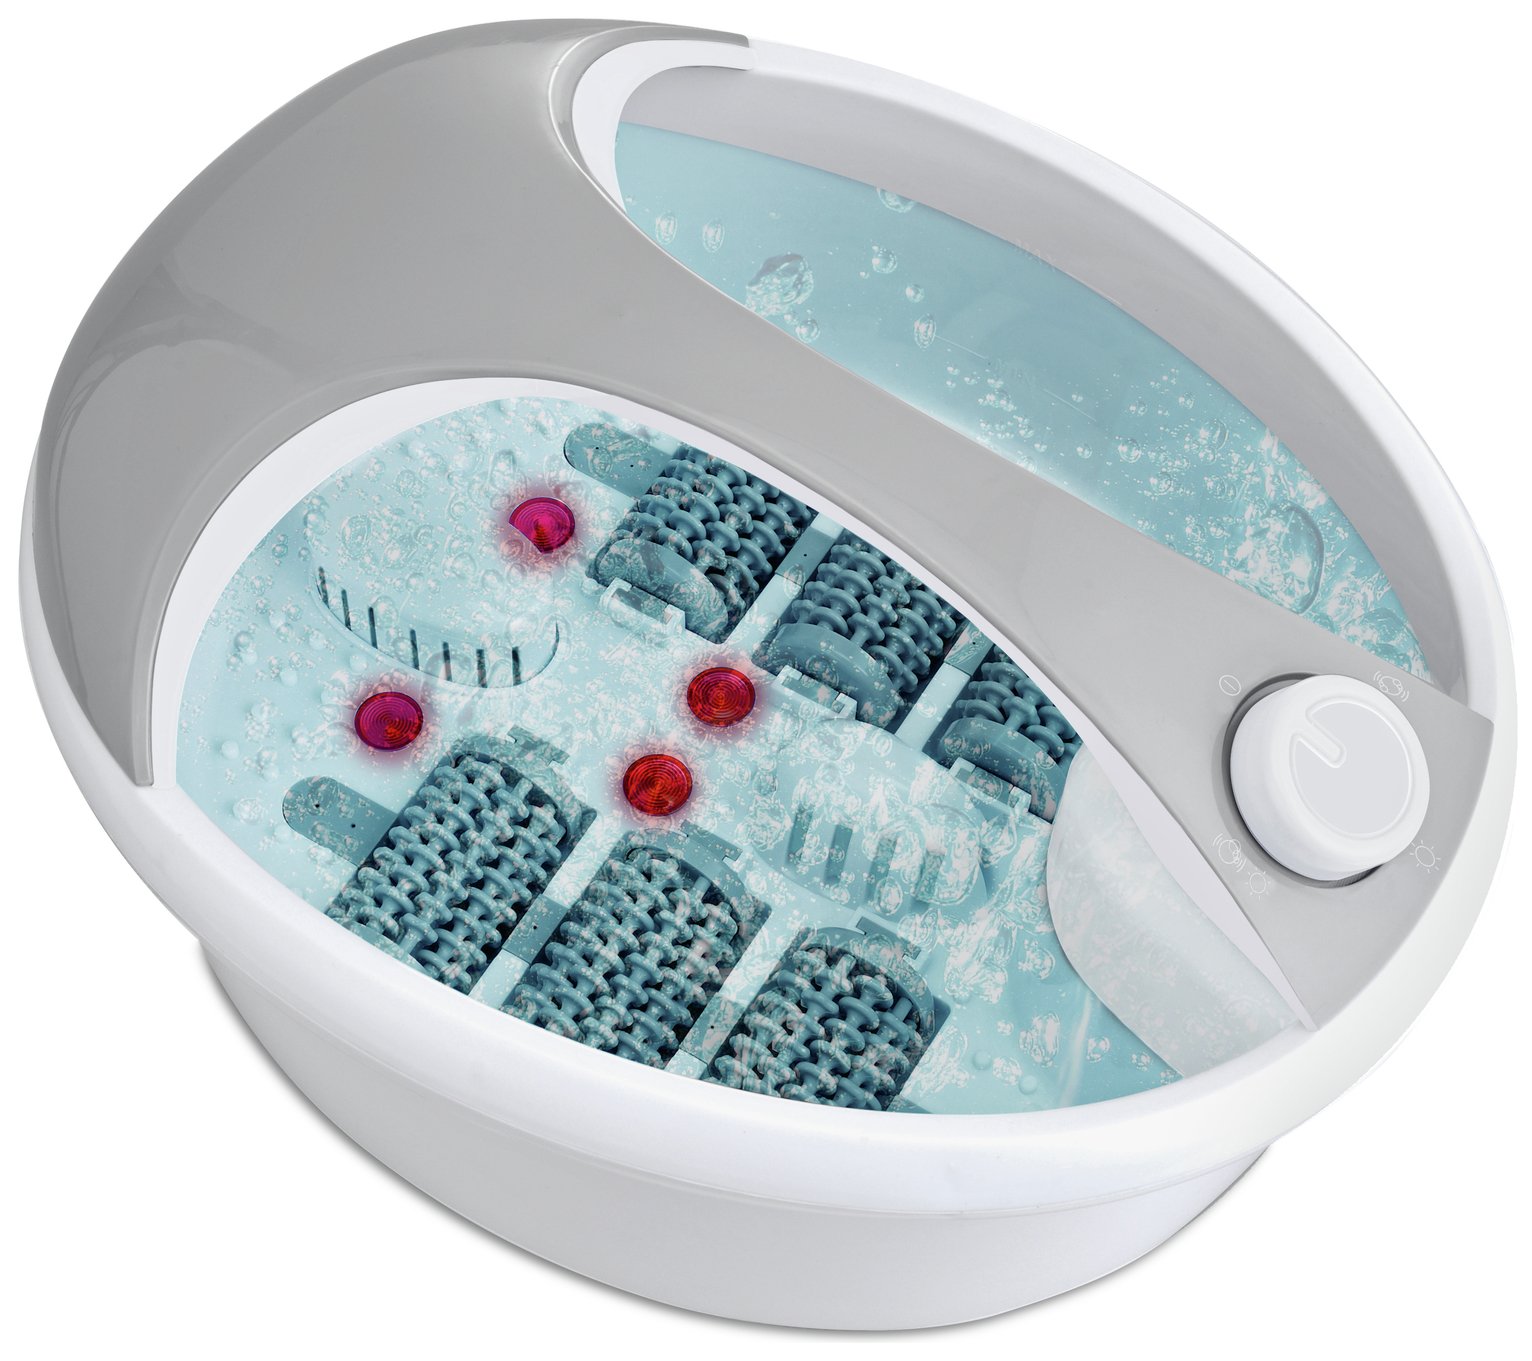 Rio Deluxe Footspa and Massager. review